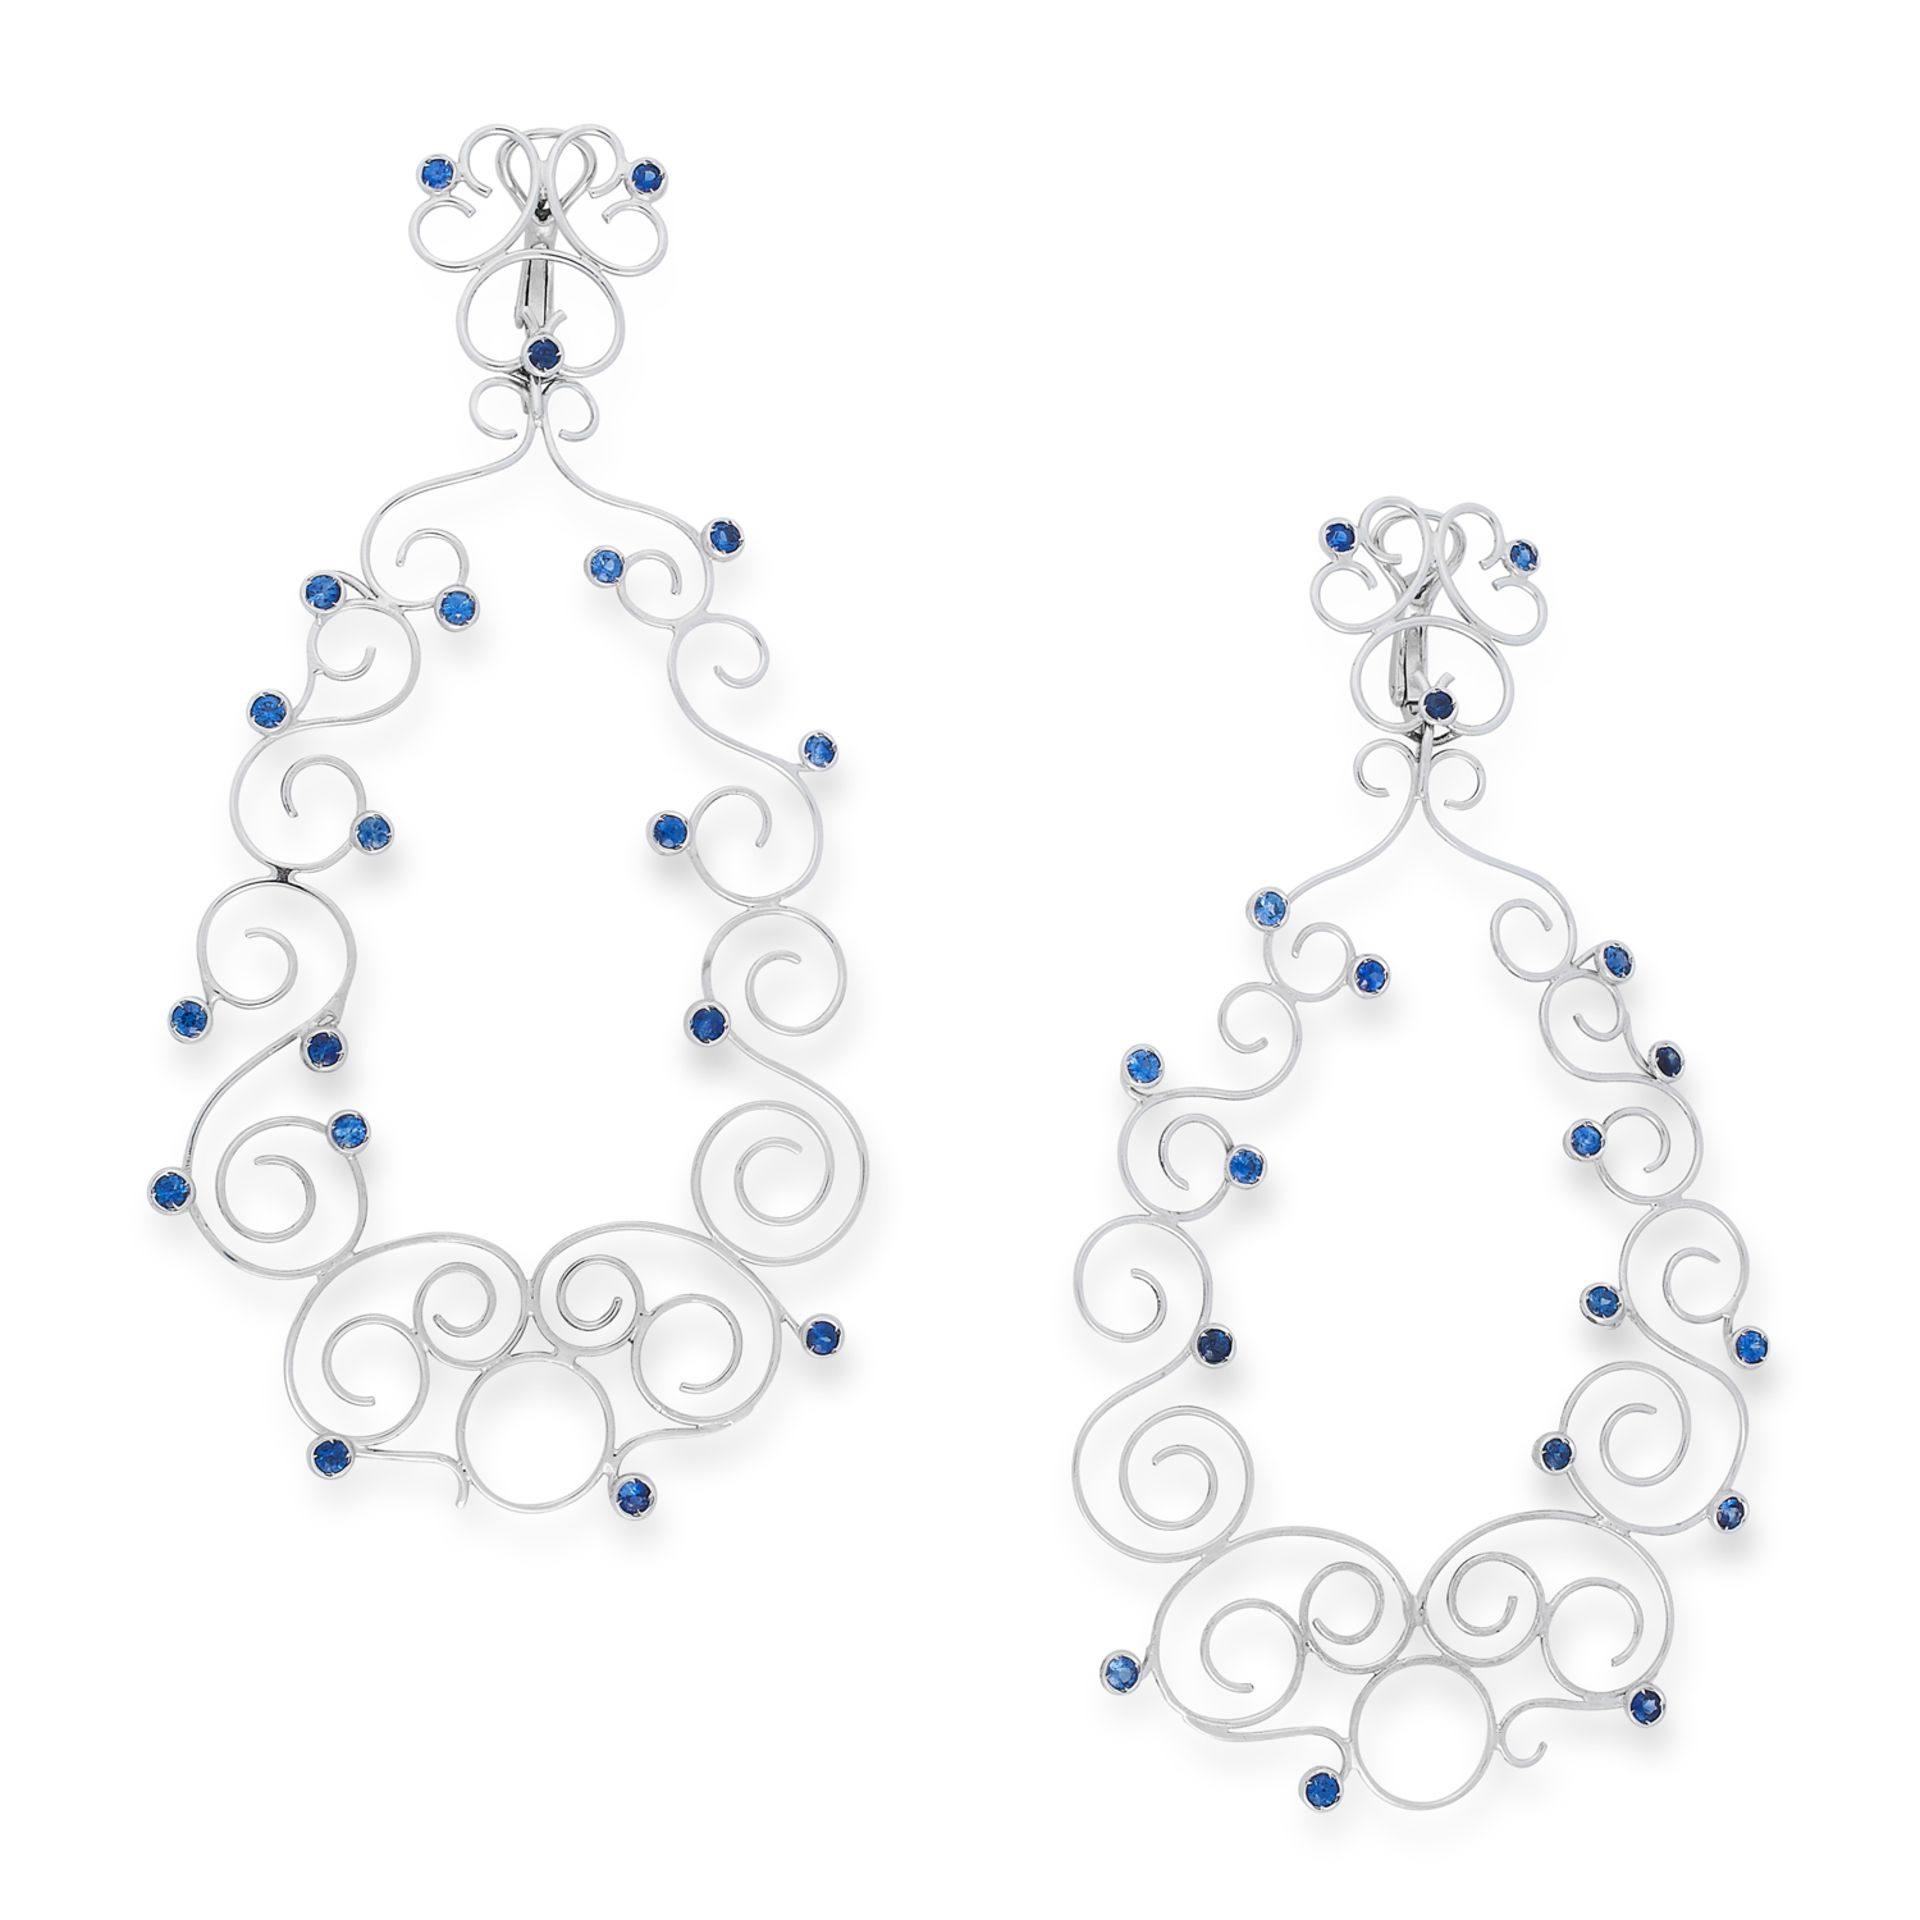 A PAIR OF SAPPHIRE EARRINGS in open framework design comprising of scrolls, set with round cut